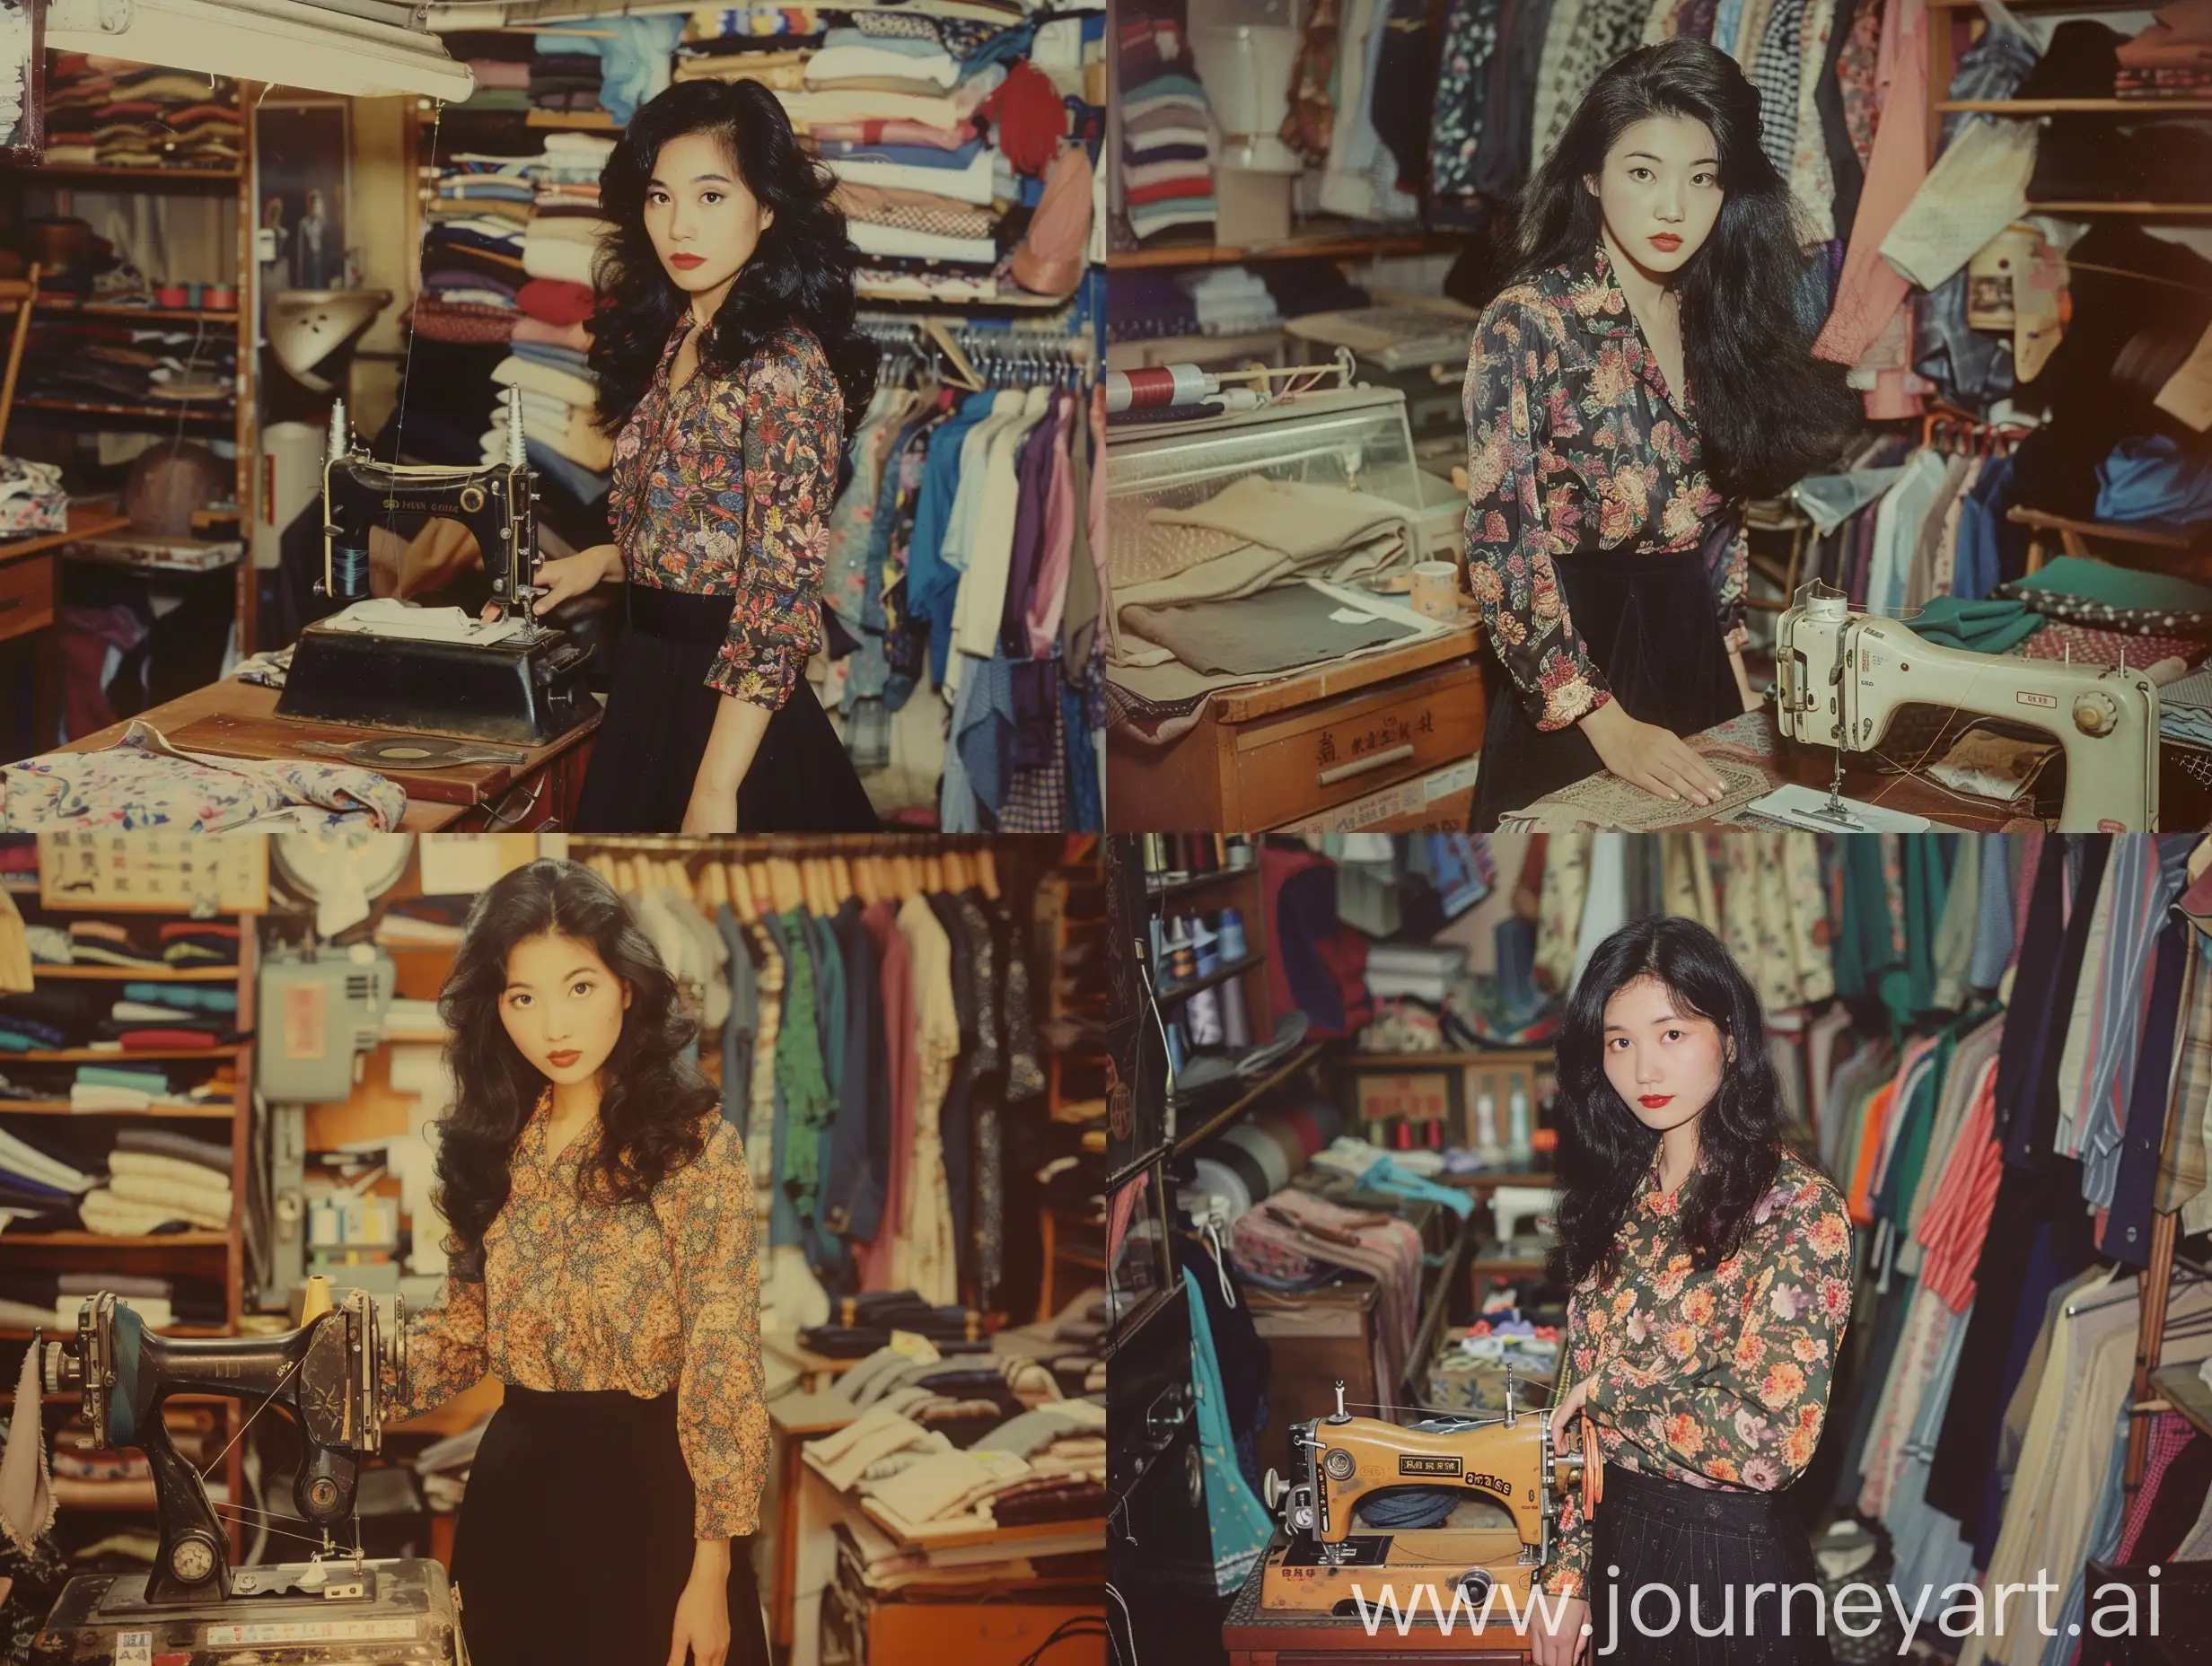 photo of a tailor shop in Hong Kong  back in the 1980s. The shop is full of outfits and cloths, with a traditional manual sewing machine in the center, and is tended by a beautful Hong Kong woman owner wearing a floral-patterned blouse and black skirt, she has long black wavy hair and foxy eyes. The photo is taken with a vintage 1980s camera feel. 